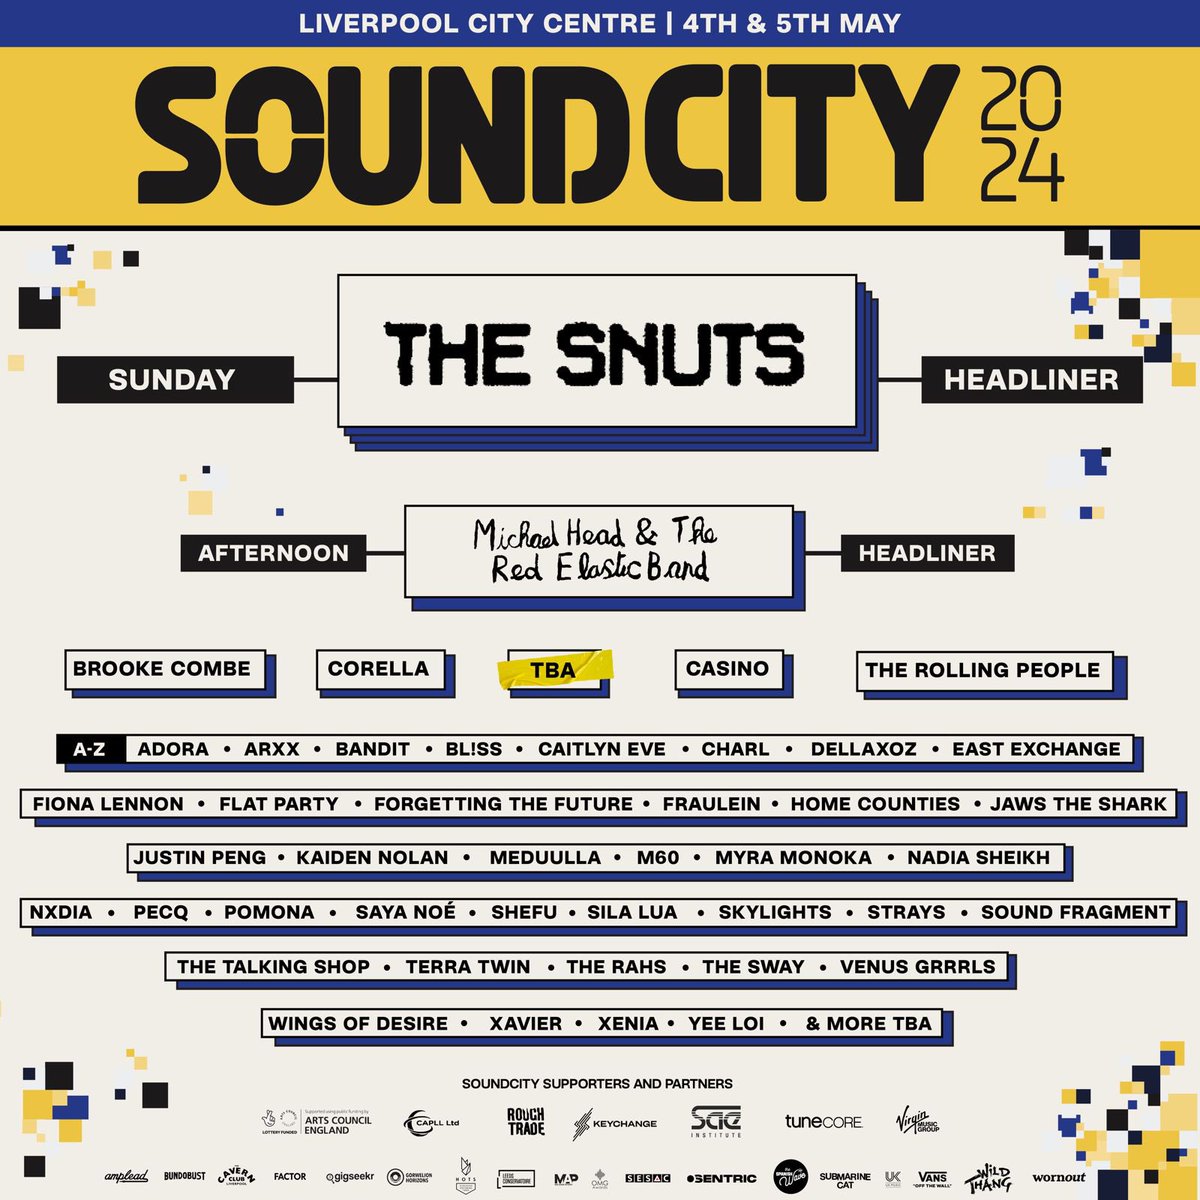 Absolutely buzzing about this! What better way to celebrate the arrival of Loophole than an afternoon headline gig in our hometown on the weekend of release? See you all there! 🔥 @SoundCity If you need to grab a ticket you can do so here seetickets.com/event/liverpoo…